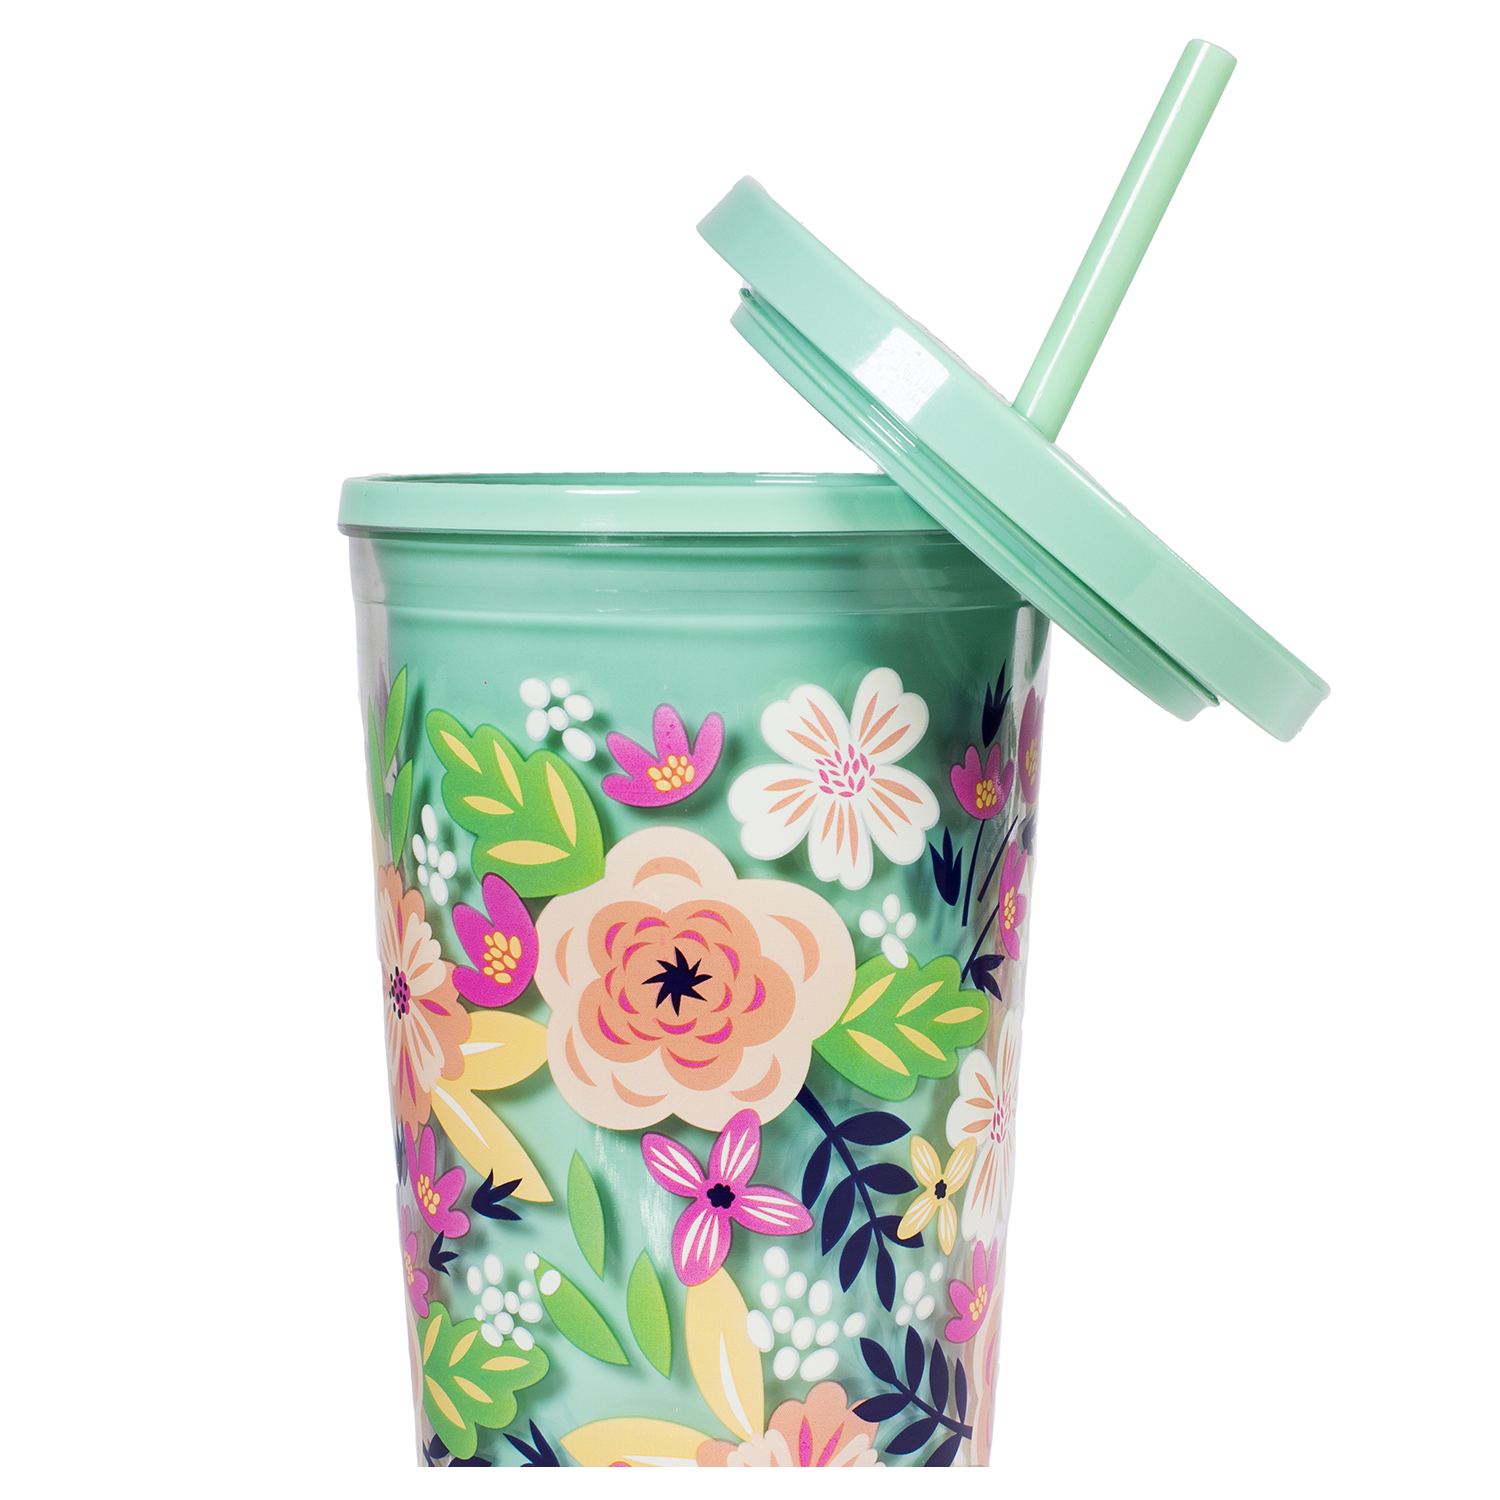 Steel Mill & Co 24 Ounce Tumbler with Lid and Reusable Straw, Floral Double Wall Insulated Travel Cup, Pink Rose